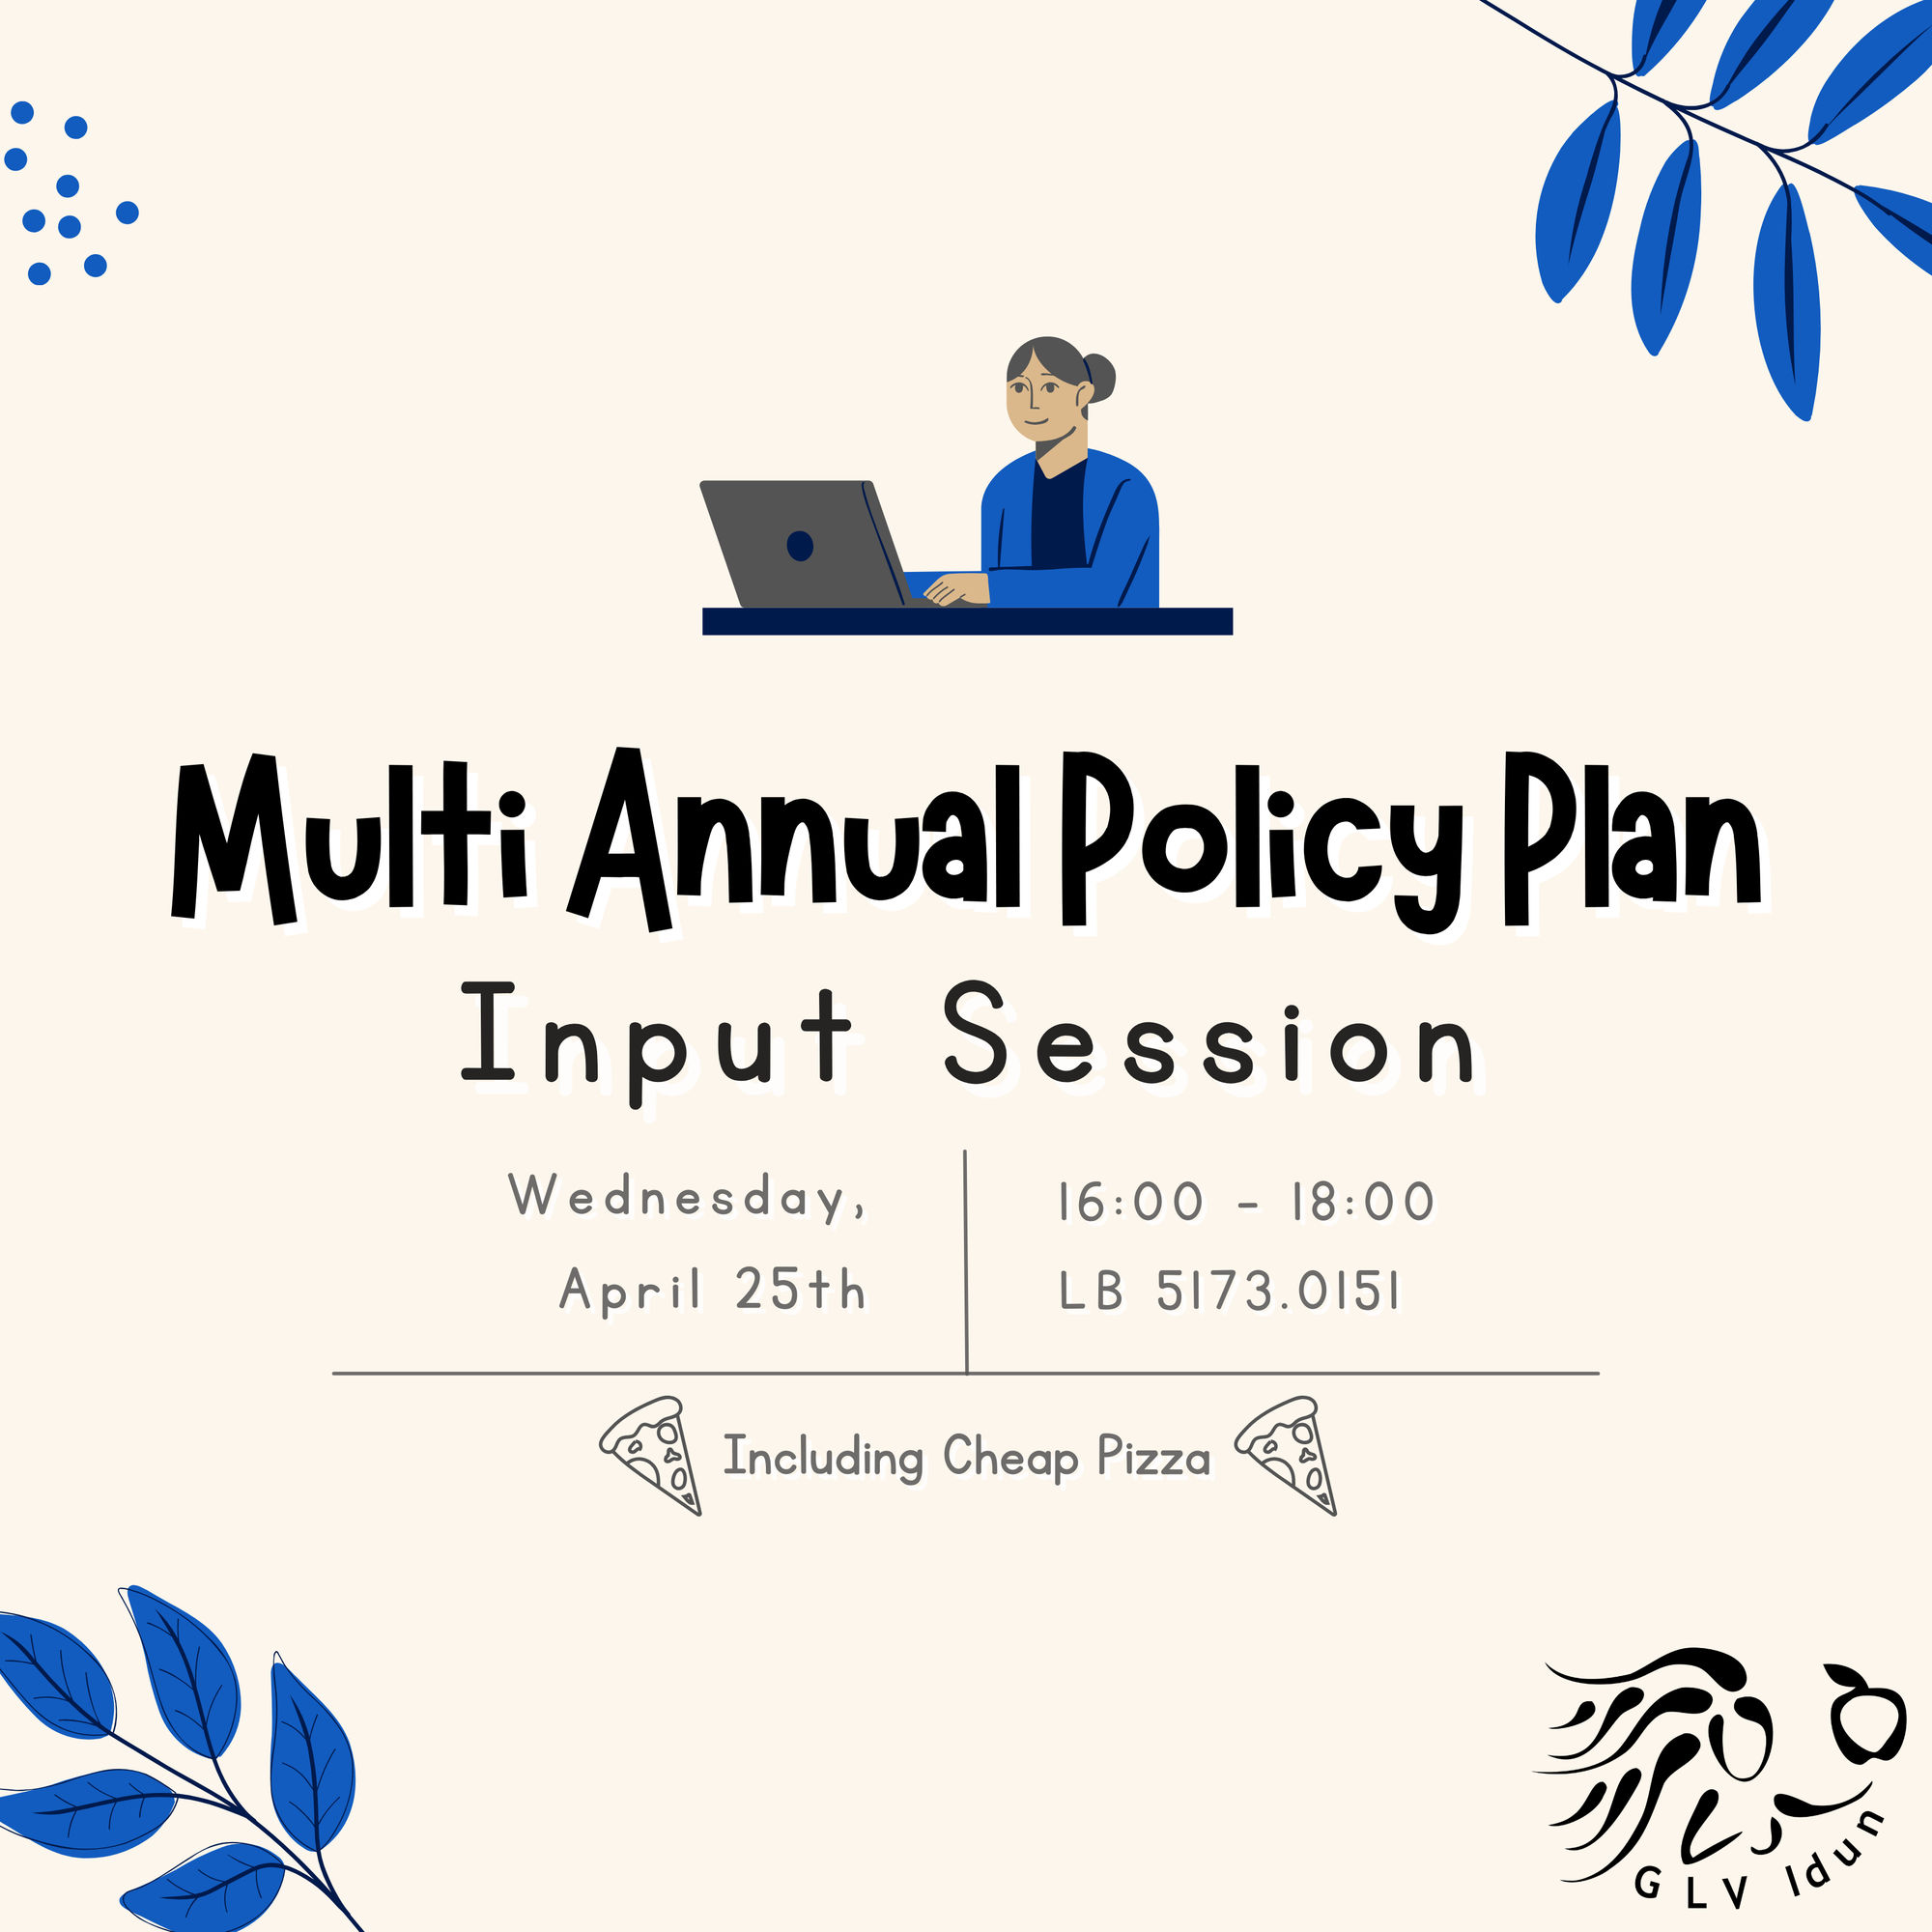 Multi Annual Policy Plan Input Session